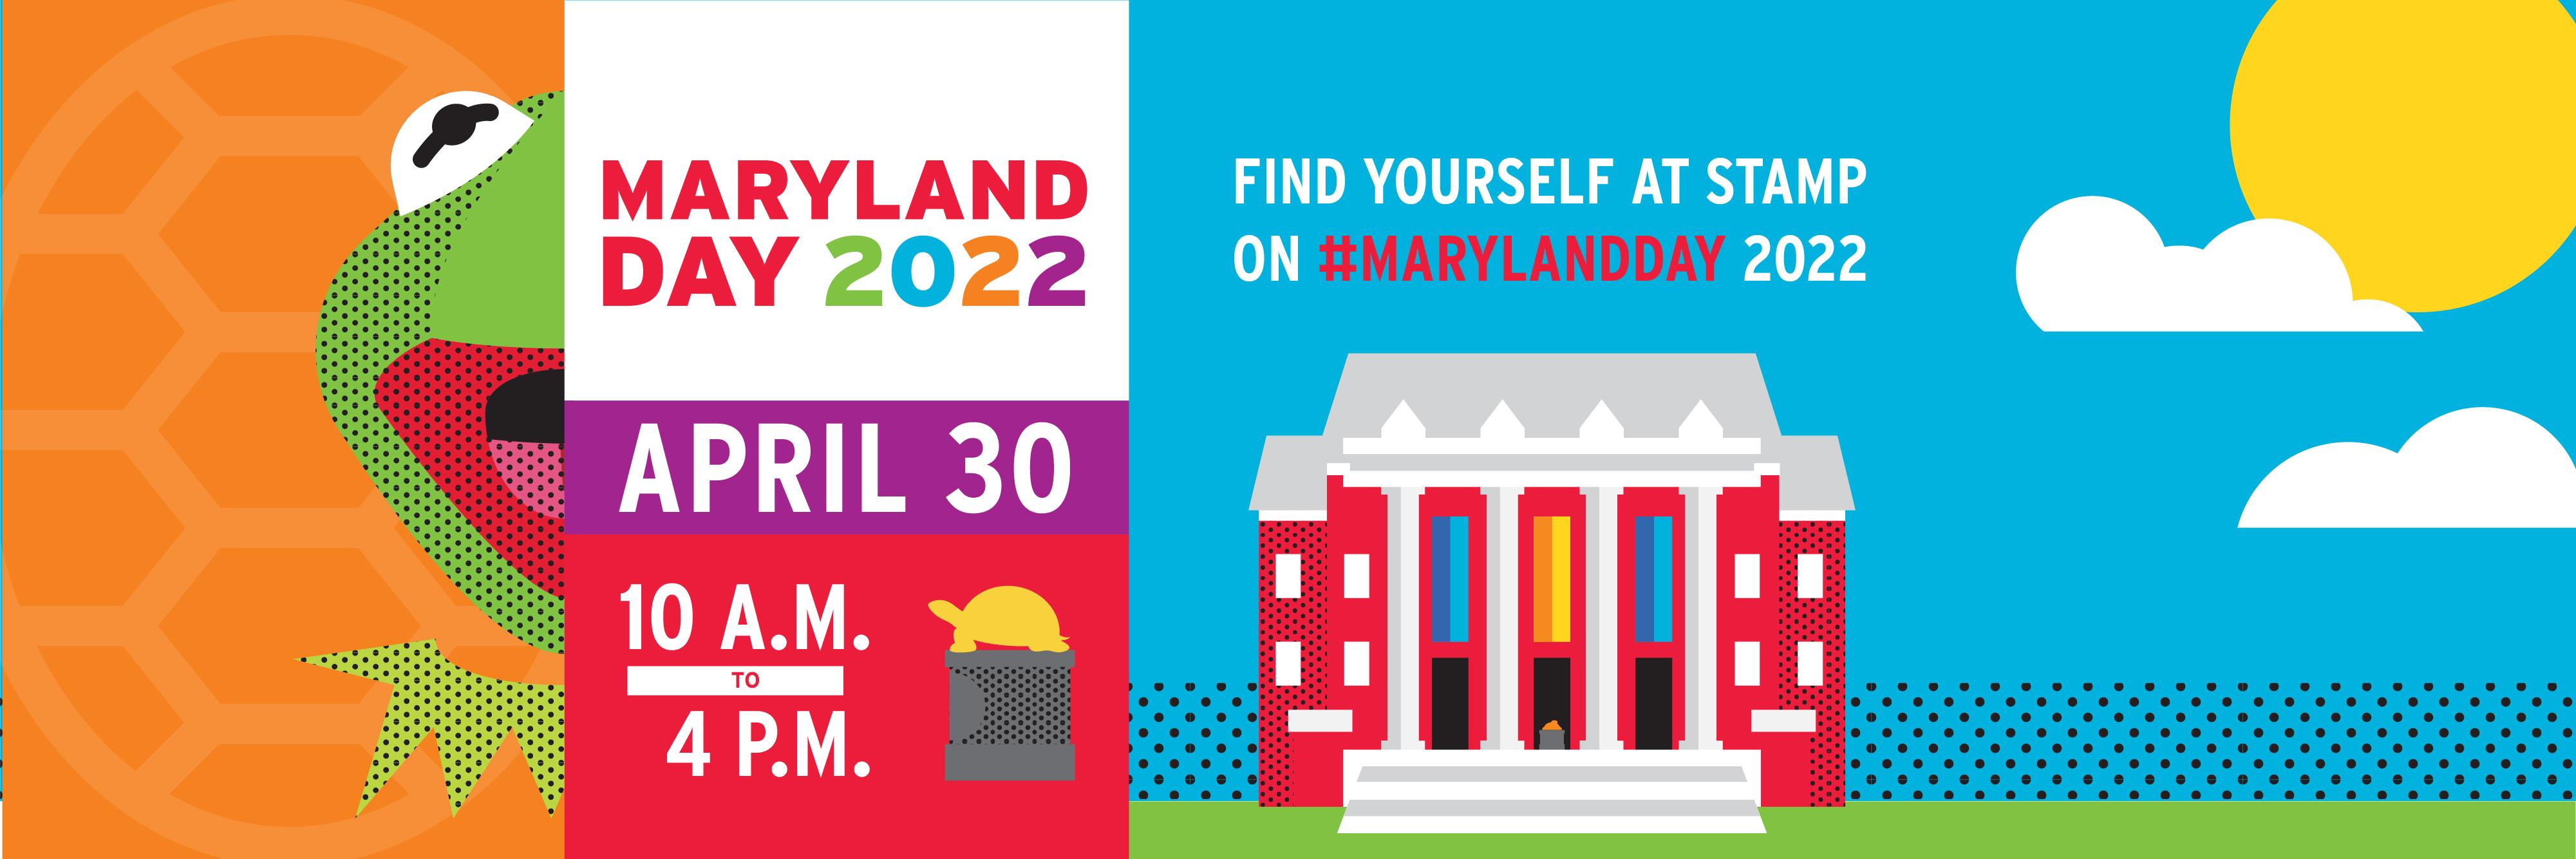 Maryland Day 2022 at STAMP